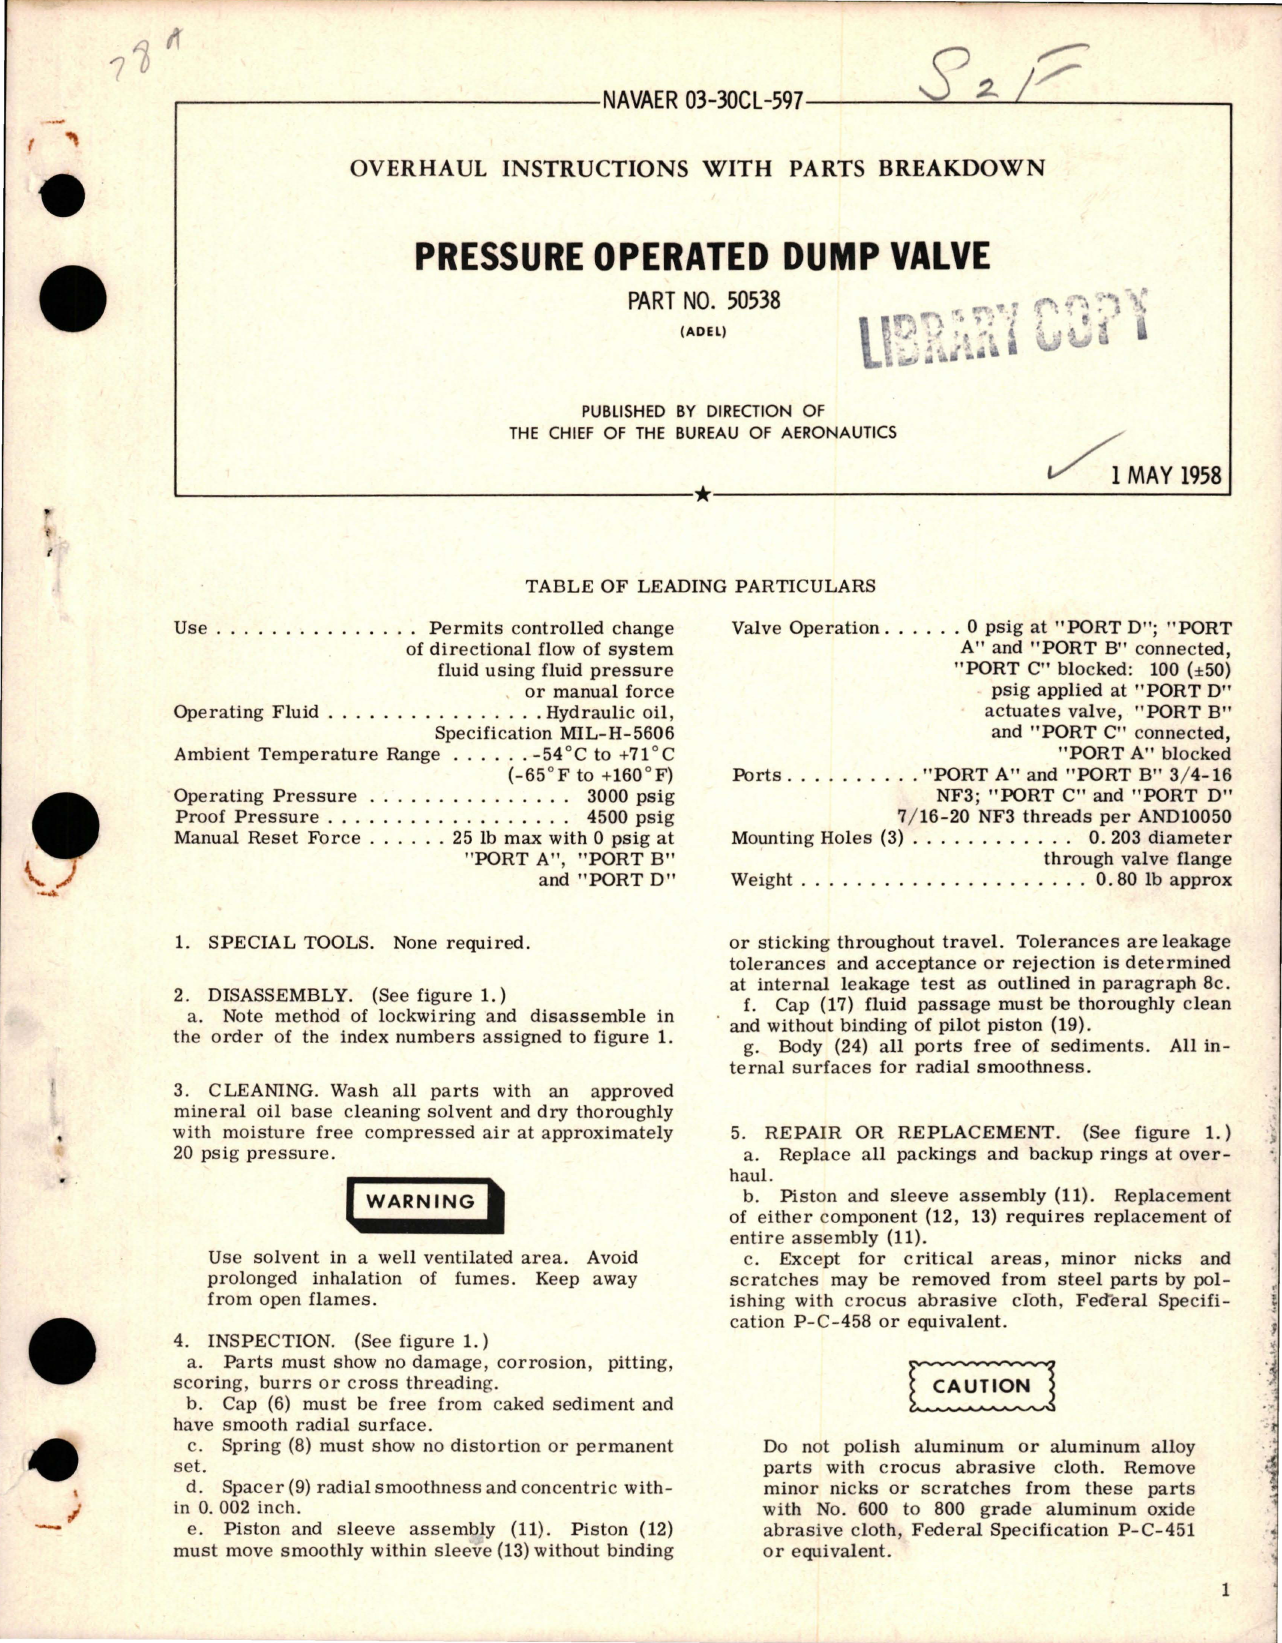 Sample page 1 from AirCorps Library document: Overhaul Instructions with Parts Breakdown for Pressure Operated Dump Valve - Part 50538 